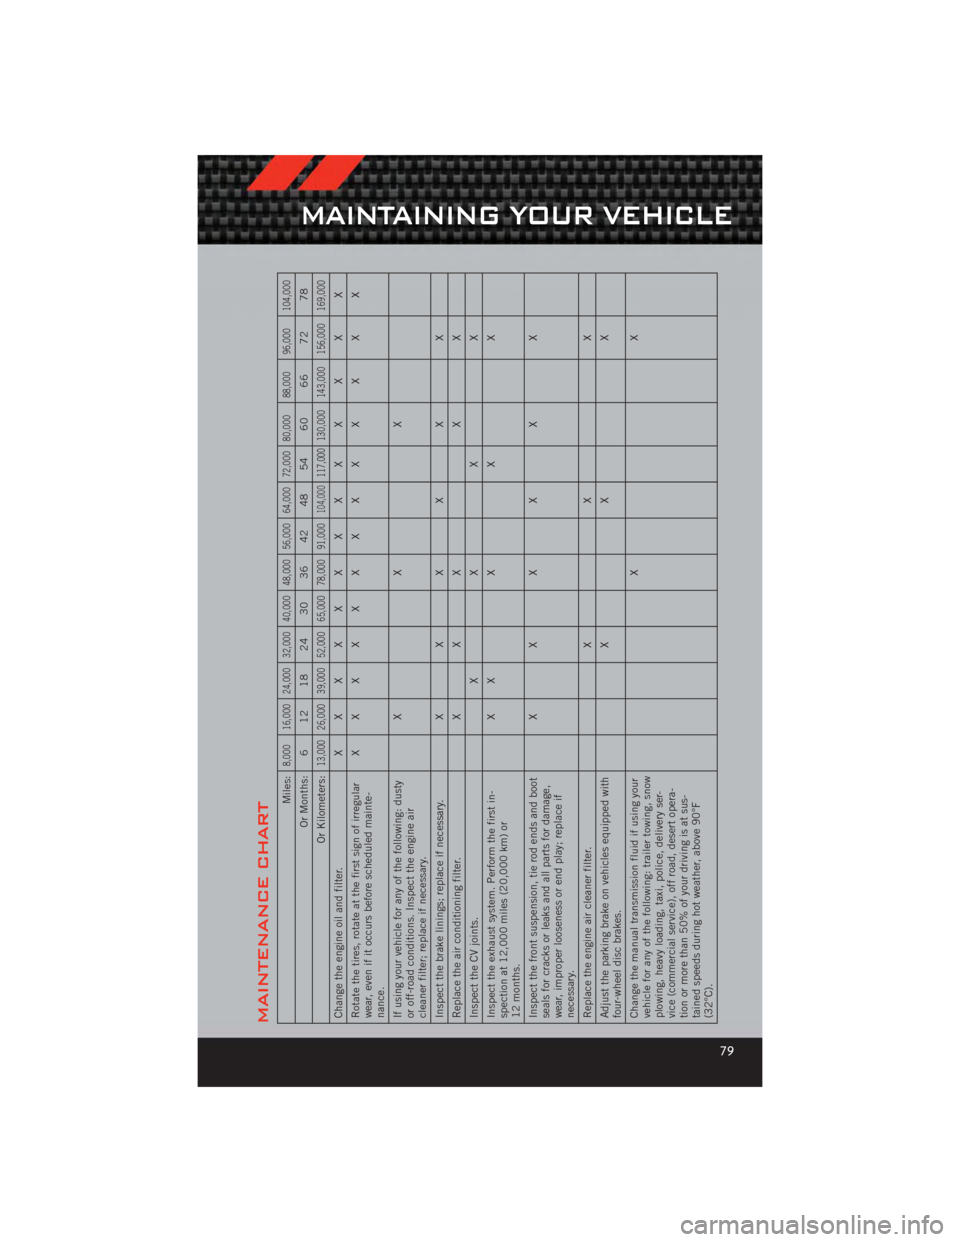 DODGE CALIBER 2012 1.G User Guide MAINTENANCE CHART
Miles:
8,000 16,000 24,000 32,000 40,000 48,000 56,000 64,000 72,000 80,000 88,000 96,000 104,000
Or Months: 6 12 18 24 30 36 42 48 54 60 66 72 78
Or Kilometers:
13,000 26,000 39,000